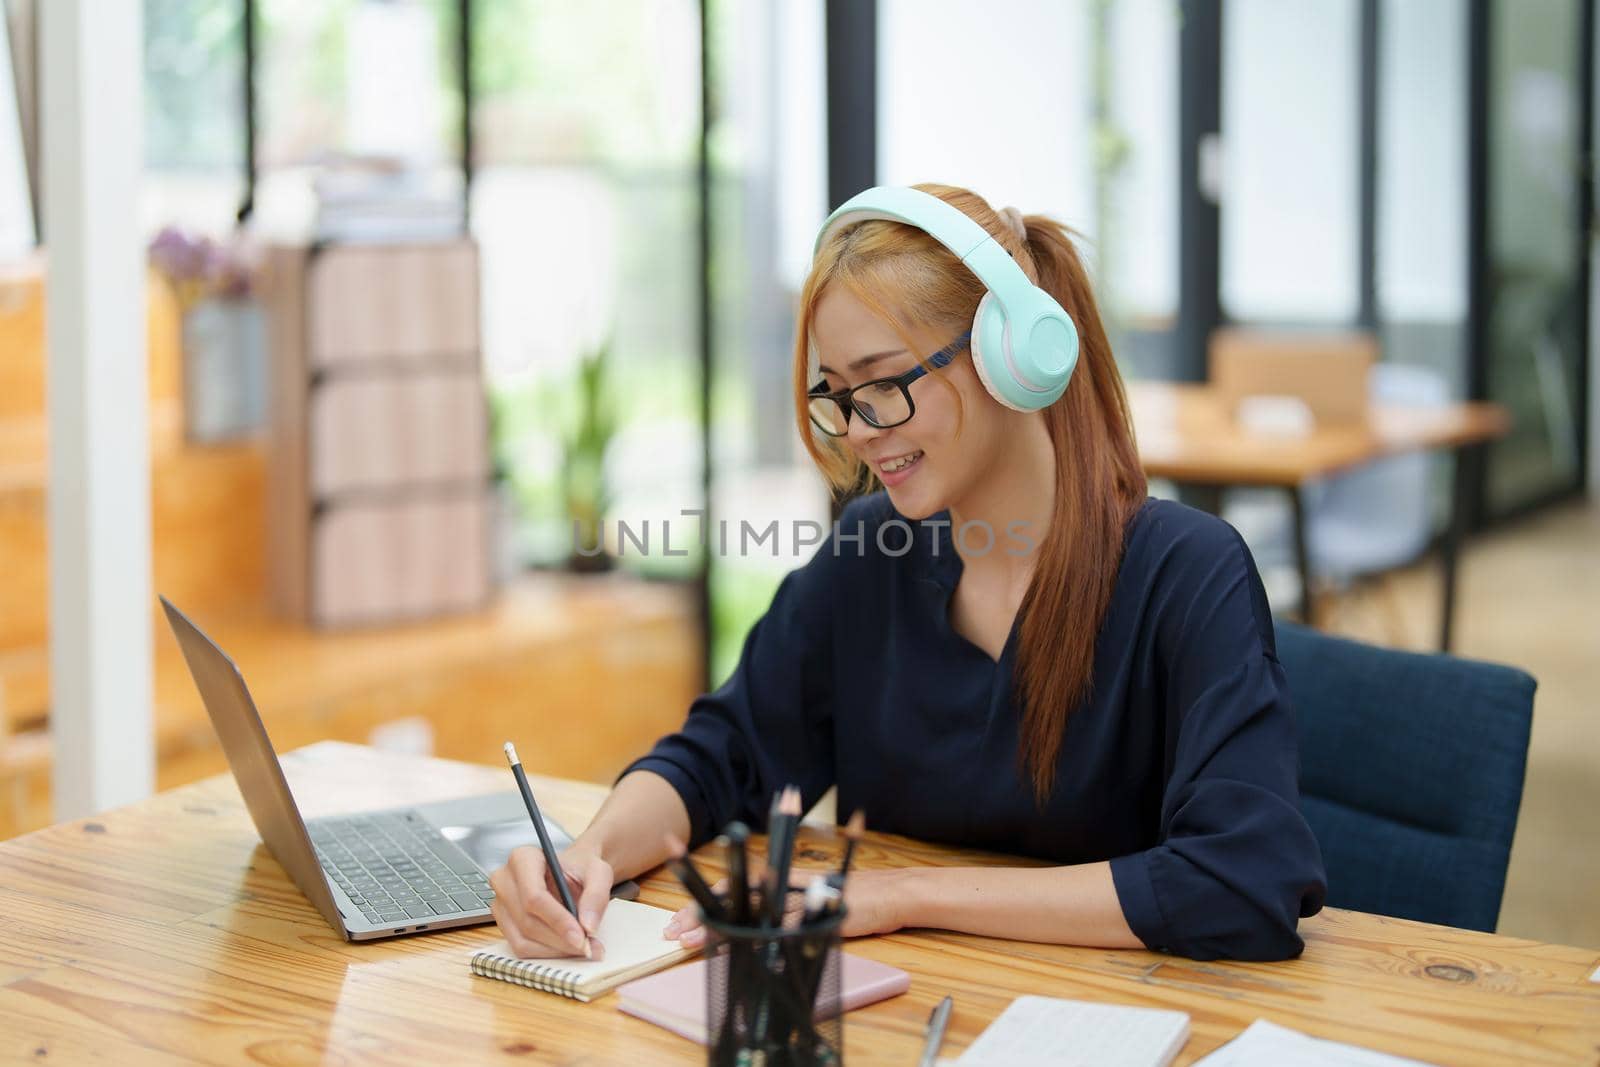 Portrait of a young Asian woman sitting at work wearing headphones over her ears to listen to music for pleasure by Manastrong